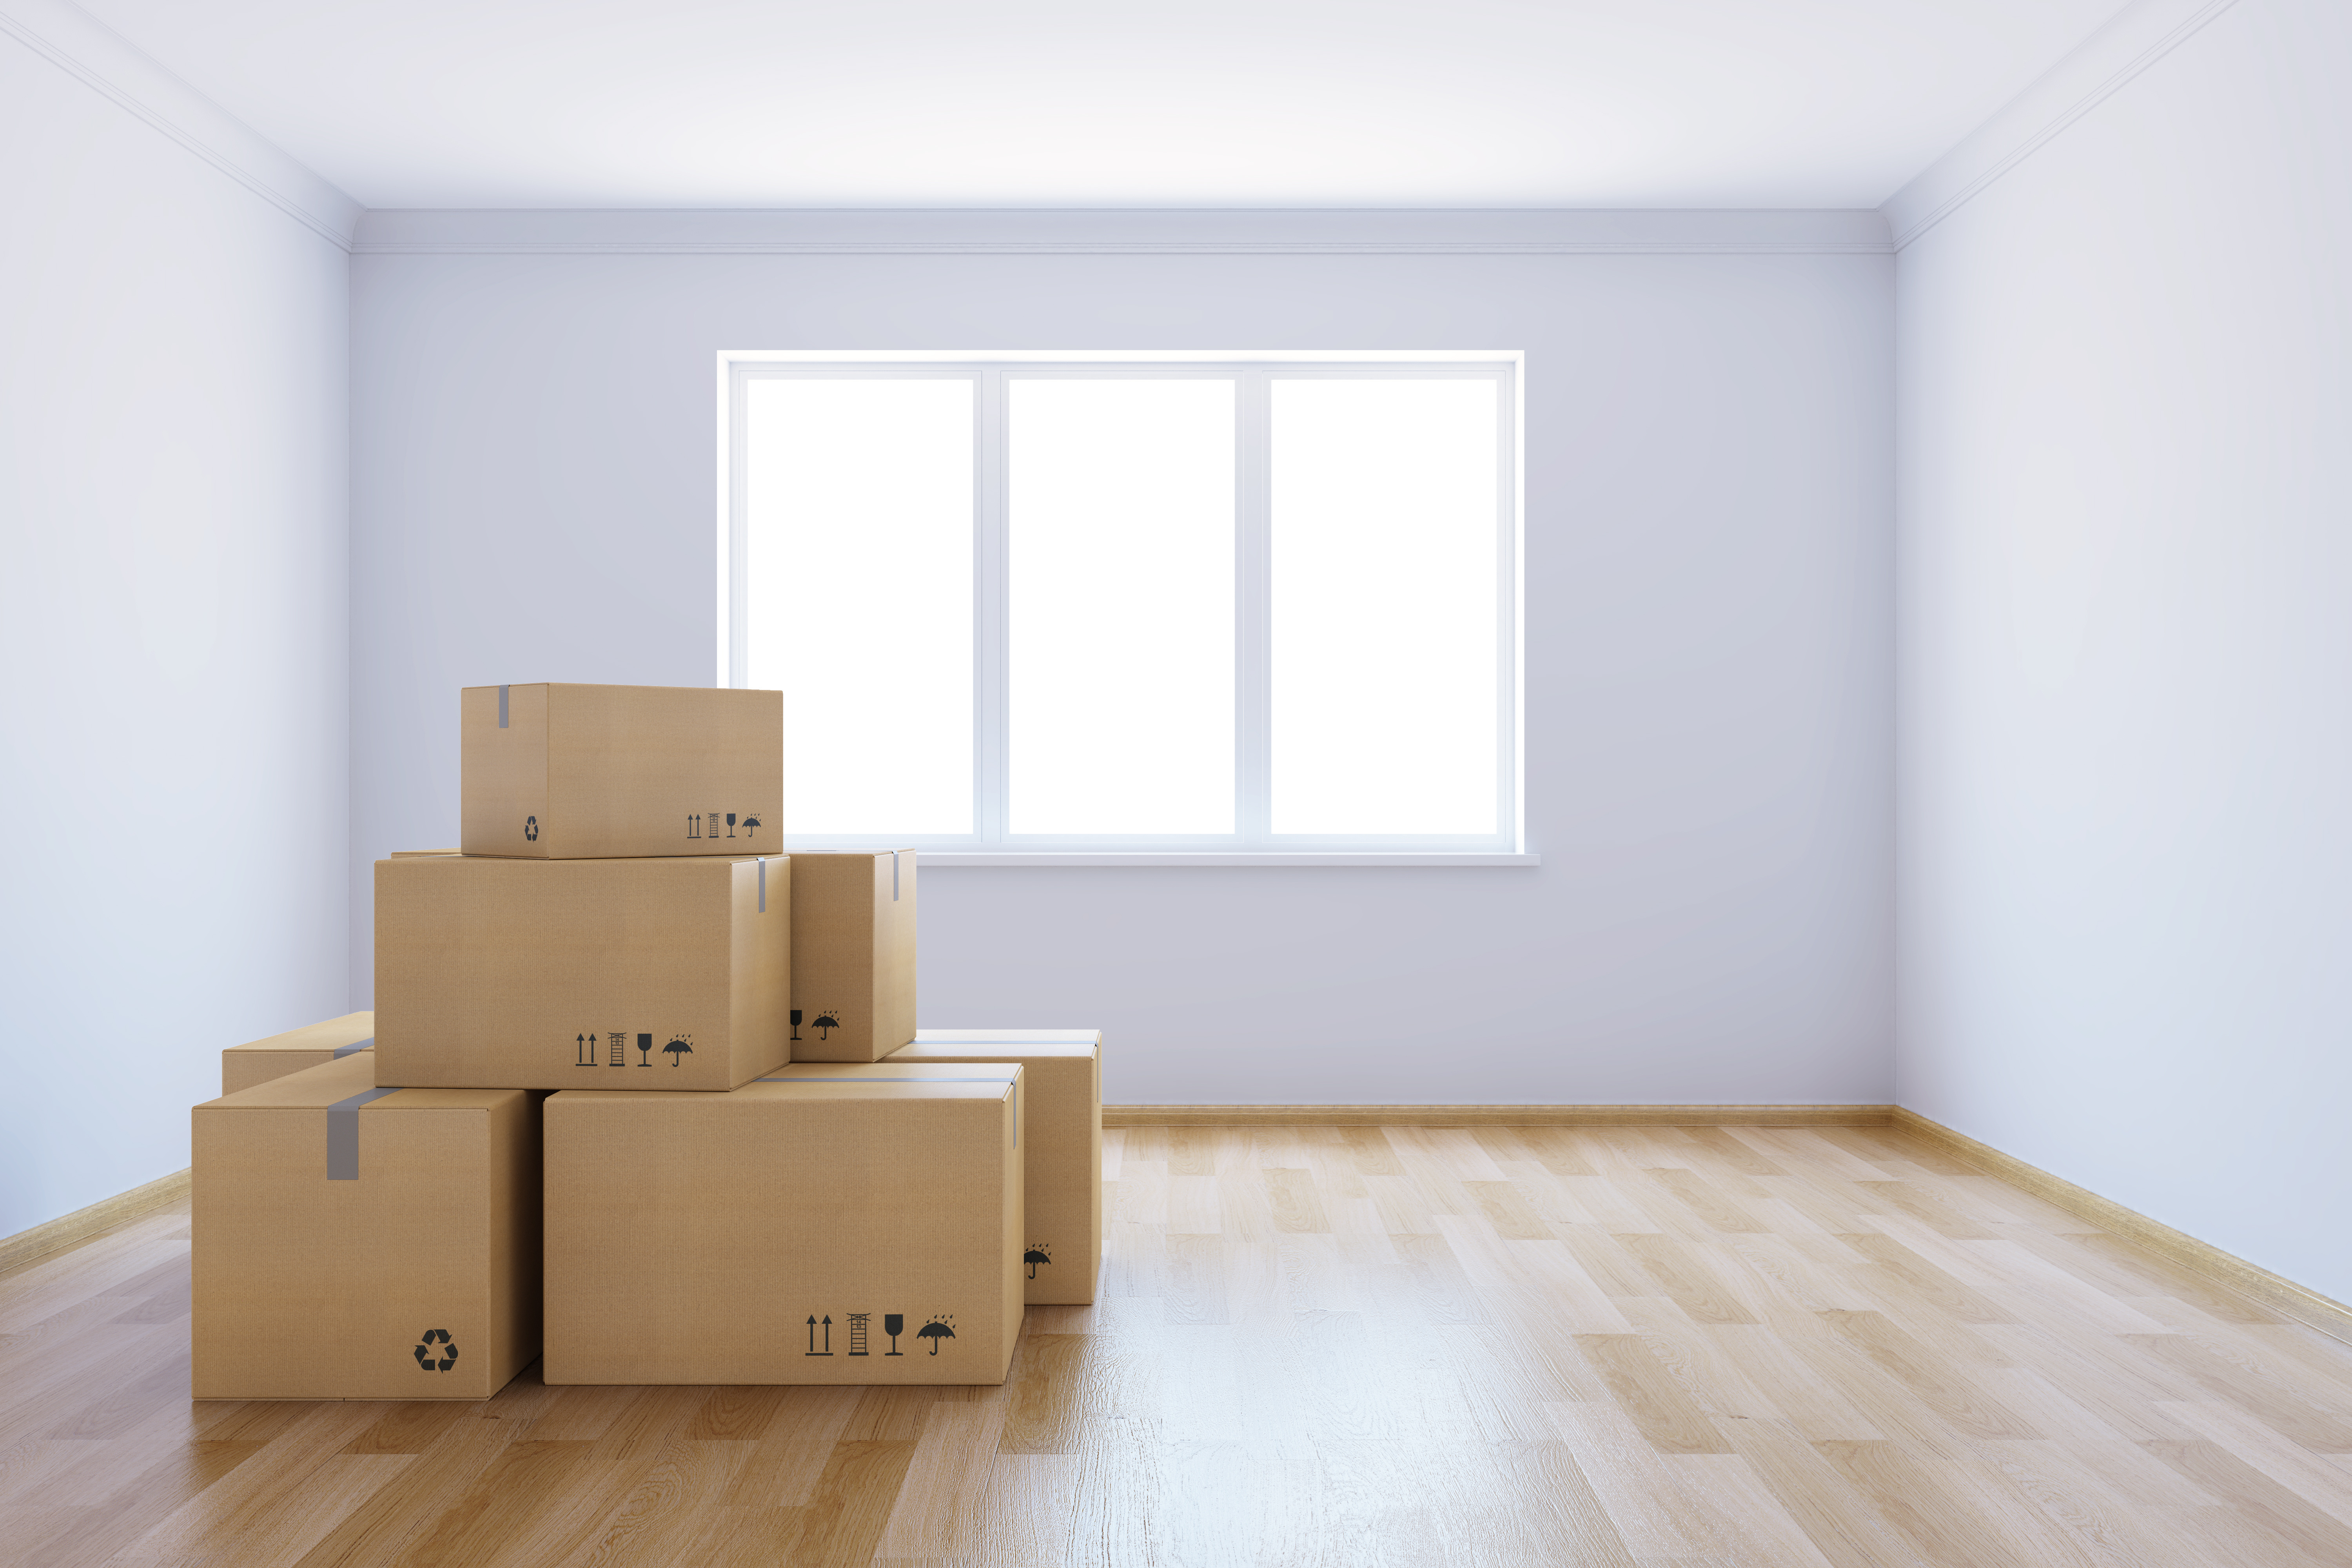 A living room with a giant window is void of items all except a pile of moving boxes.